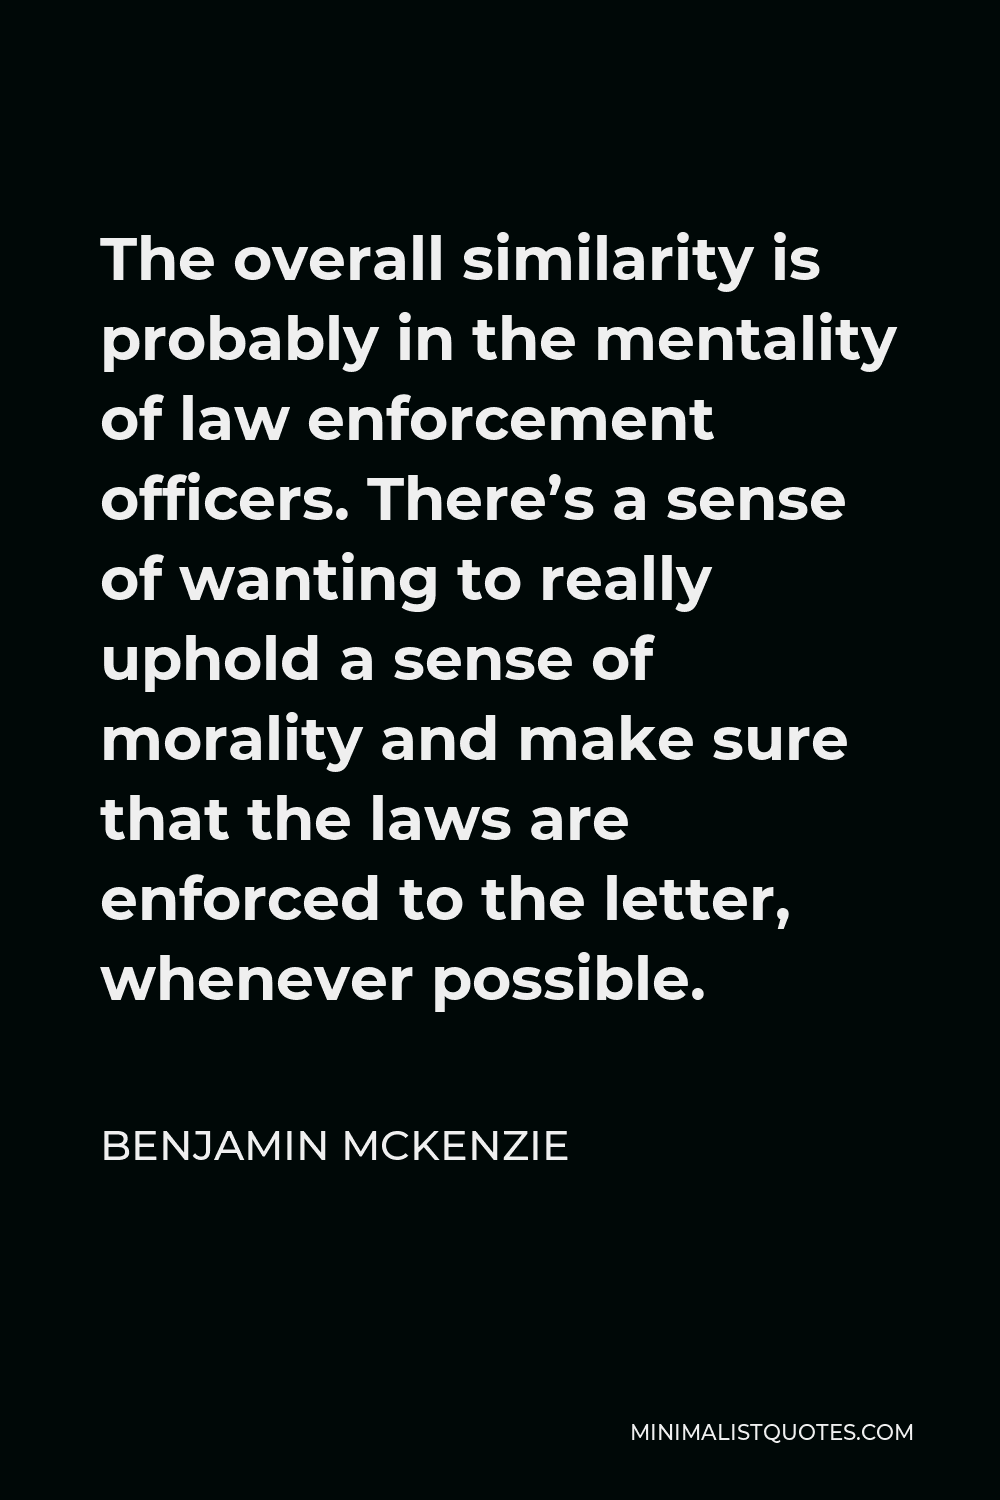 Benjamin McKenzie Quote - The overall similarity is probably in the mentality of law enforcement officers. There’s a sense of wanting to really uphold a sense of morality and make sure that the laws are enforced to the letter, whenever possible.